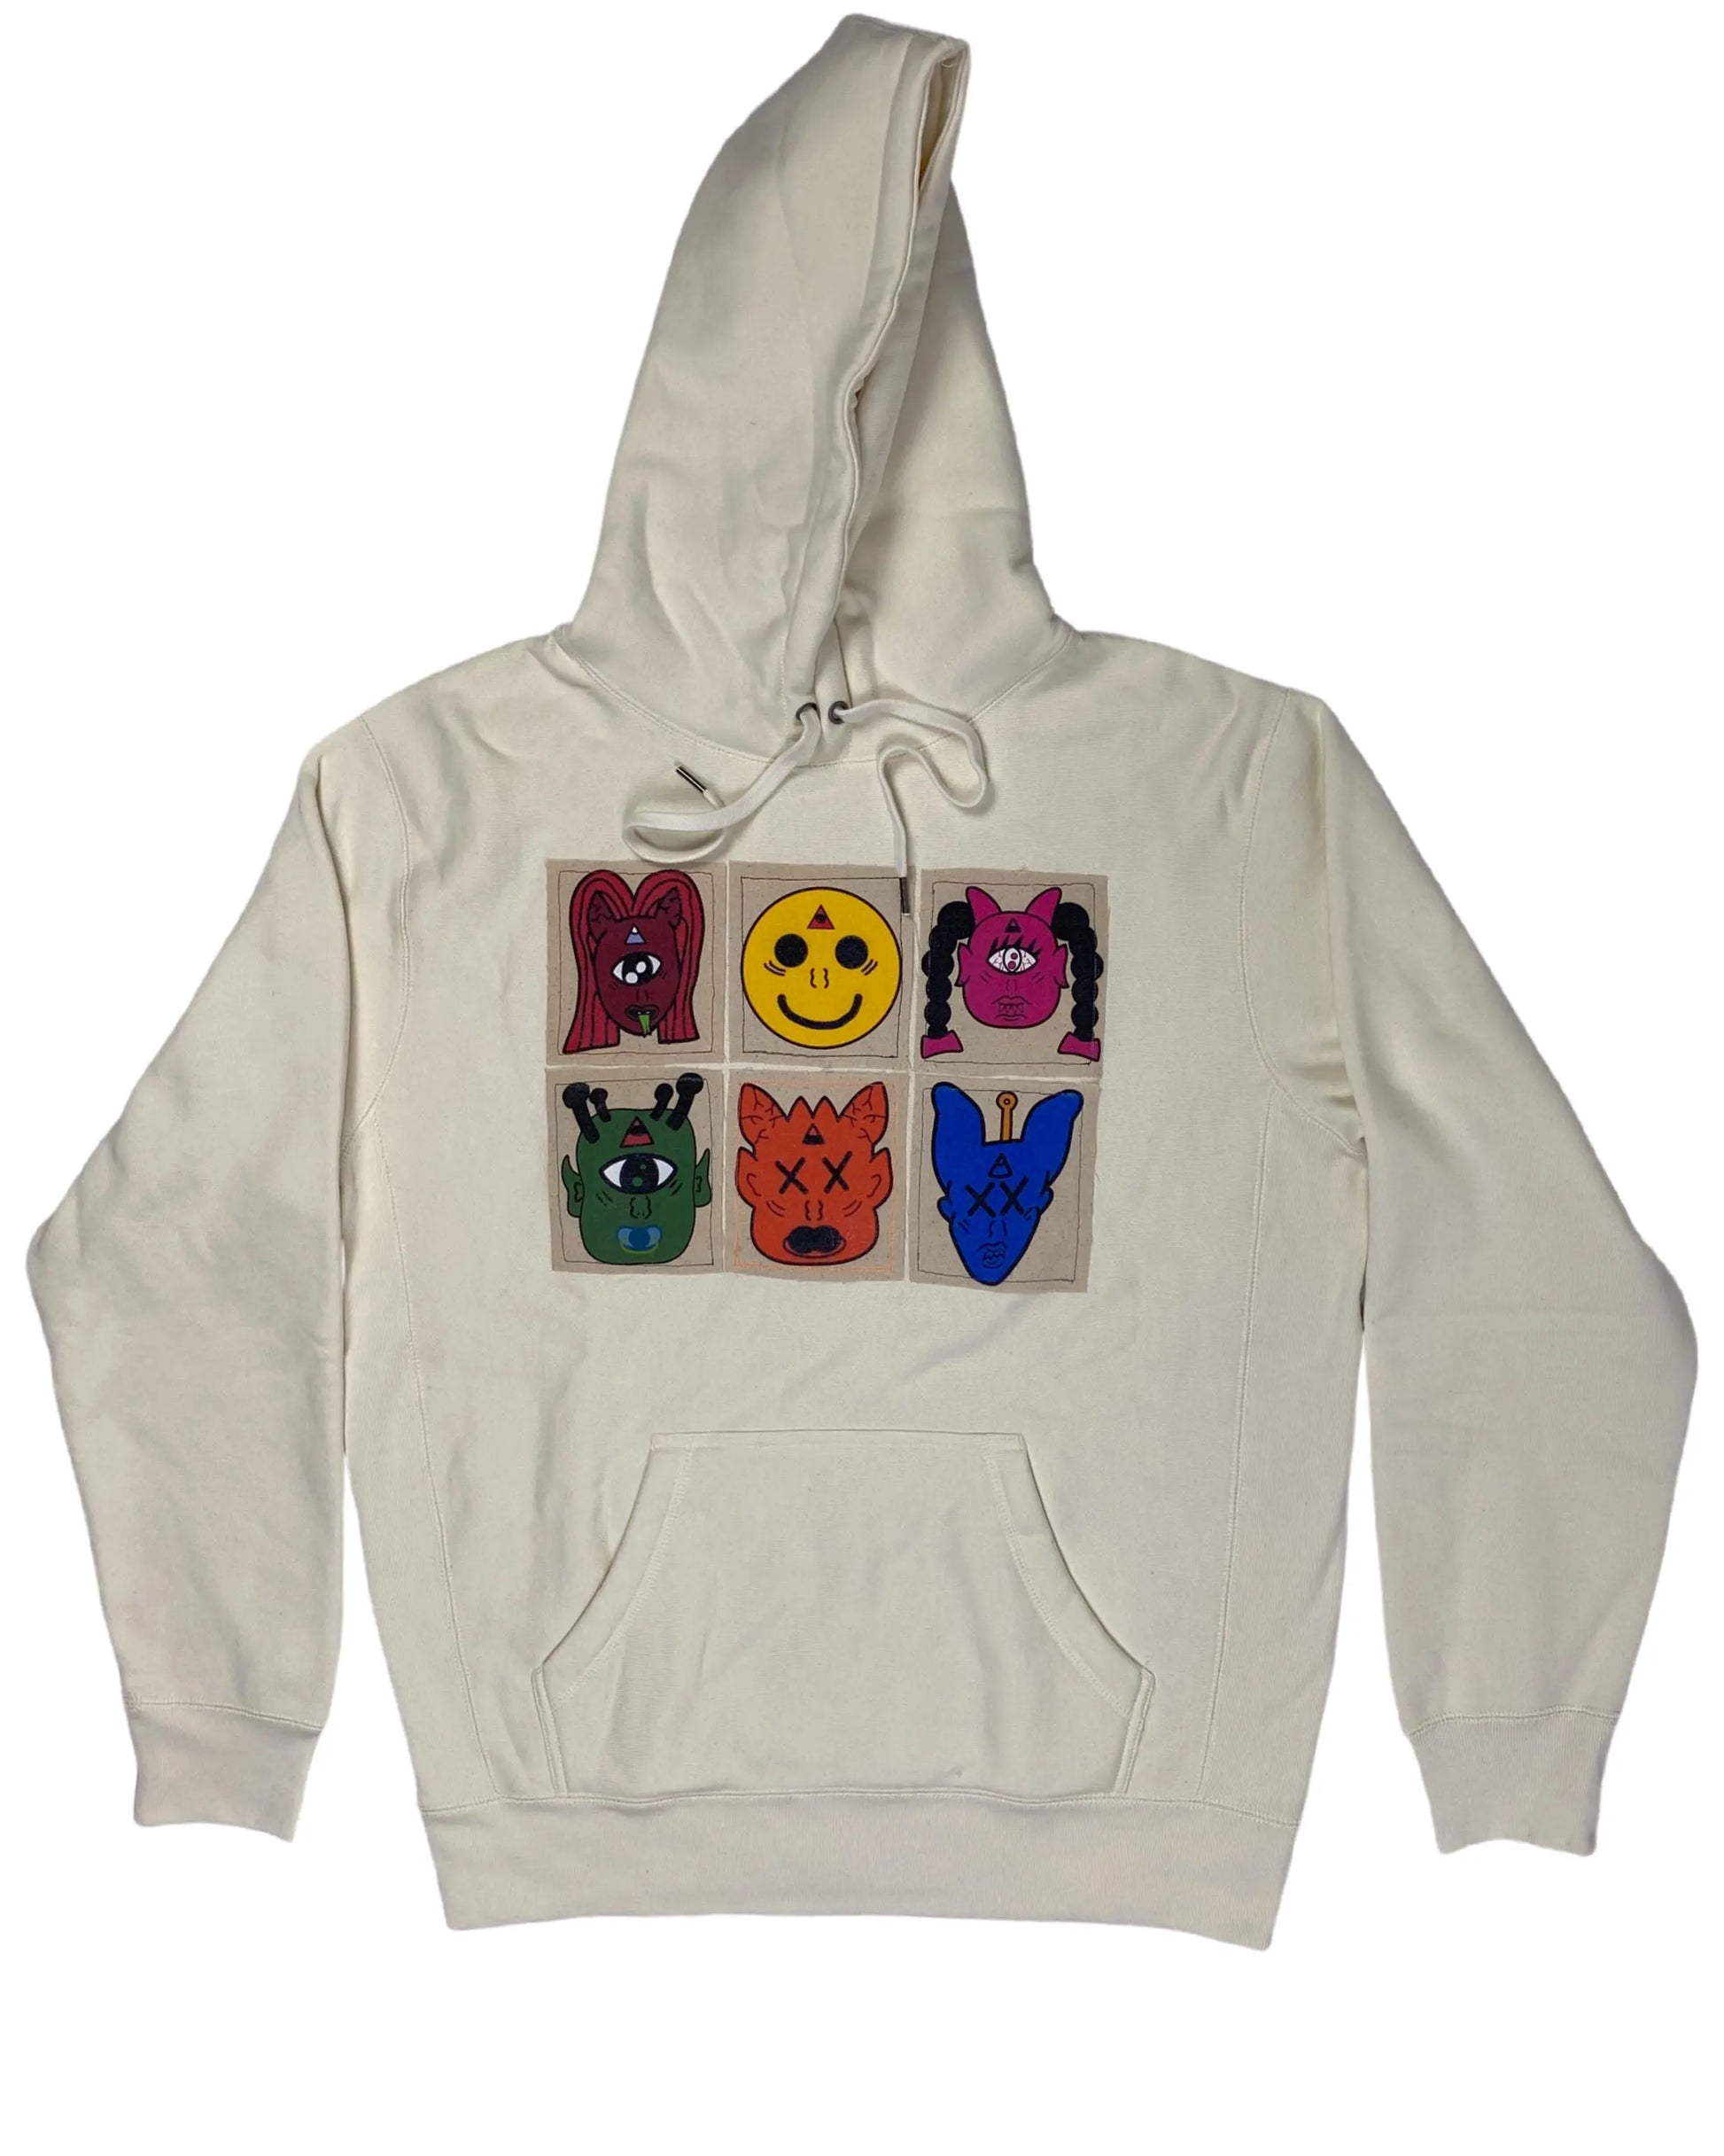 6 PC Family Hoodie UKEME OFFICIAL